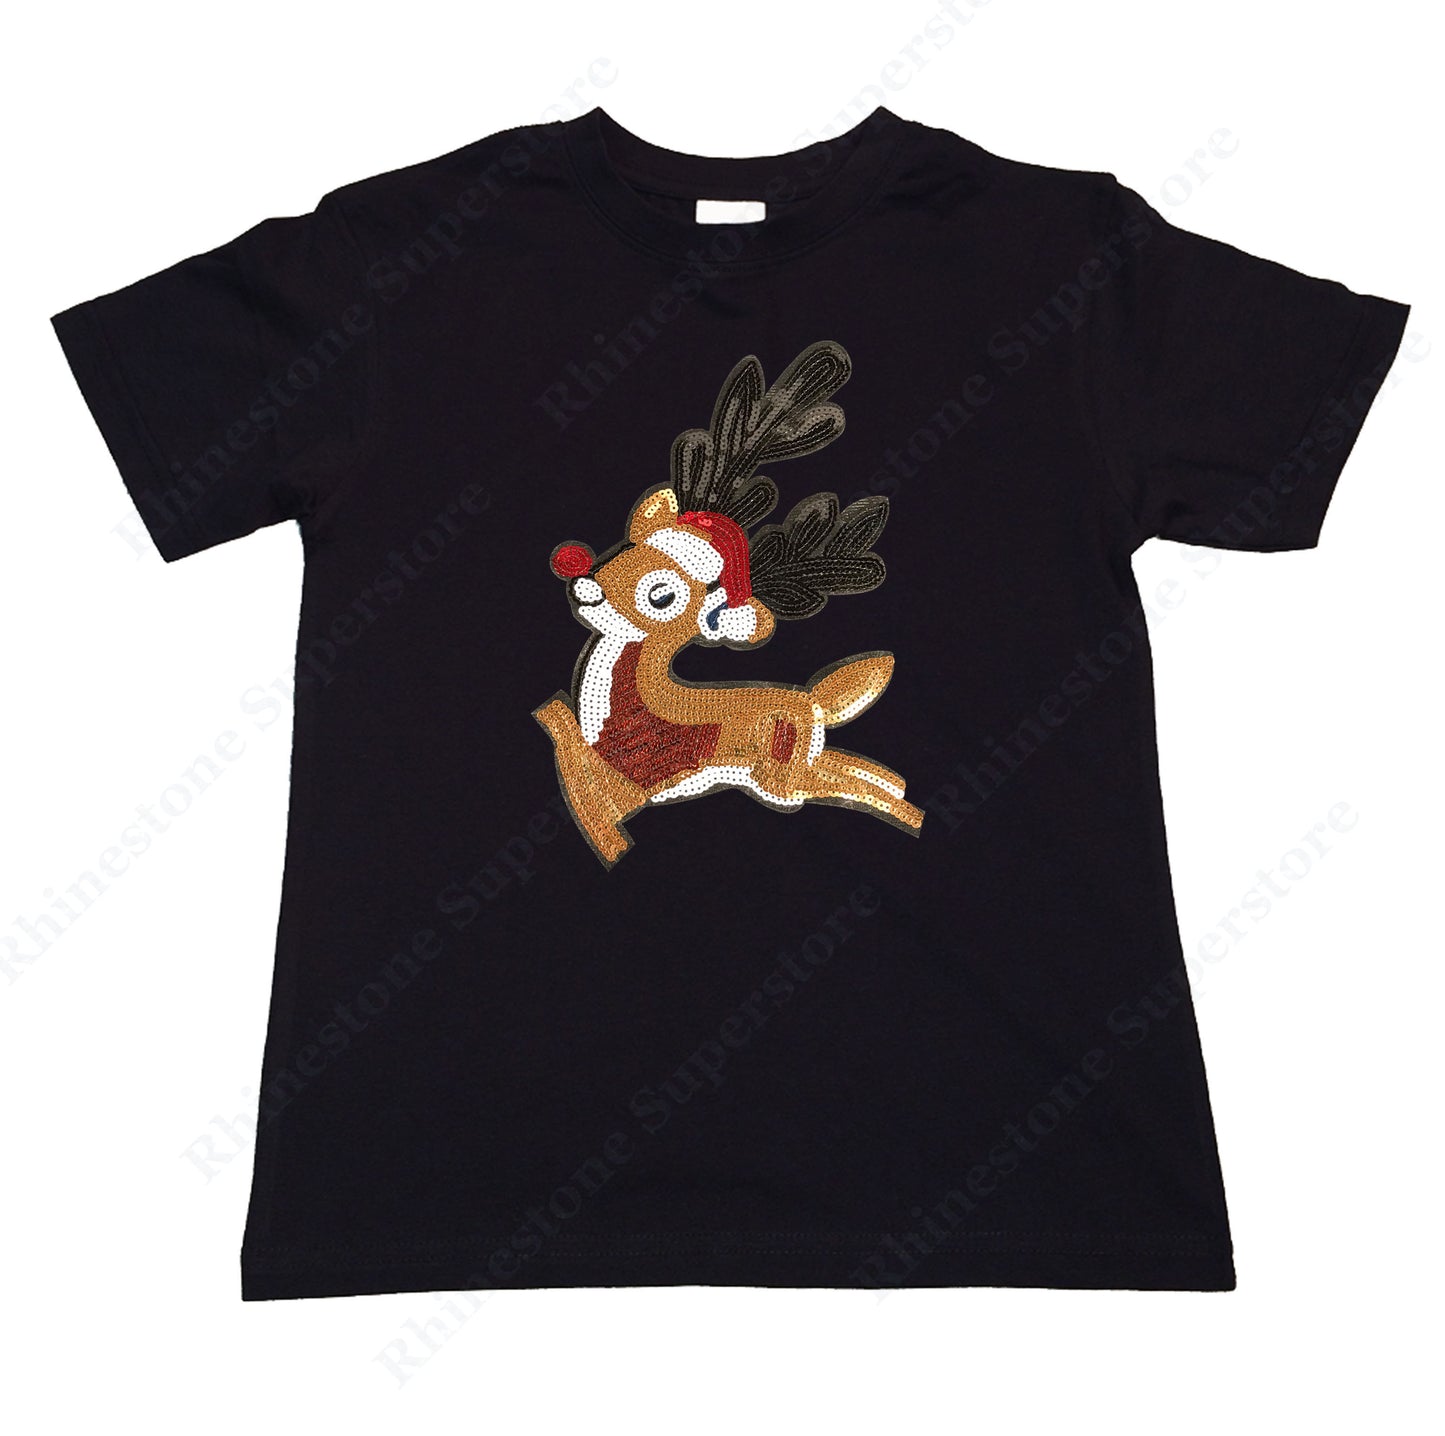 Girls Rhinestone T-Shirt " Rudolph The Red Nose Reindeer in Sequence " Kids Size 3 to 14 Available